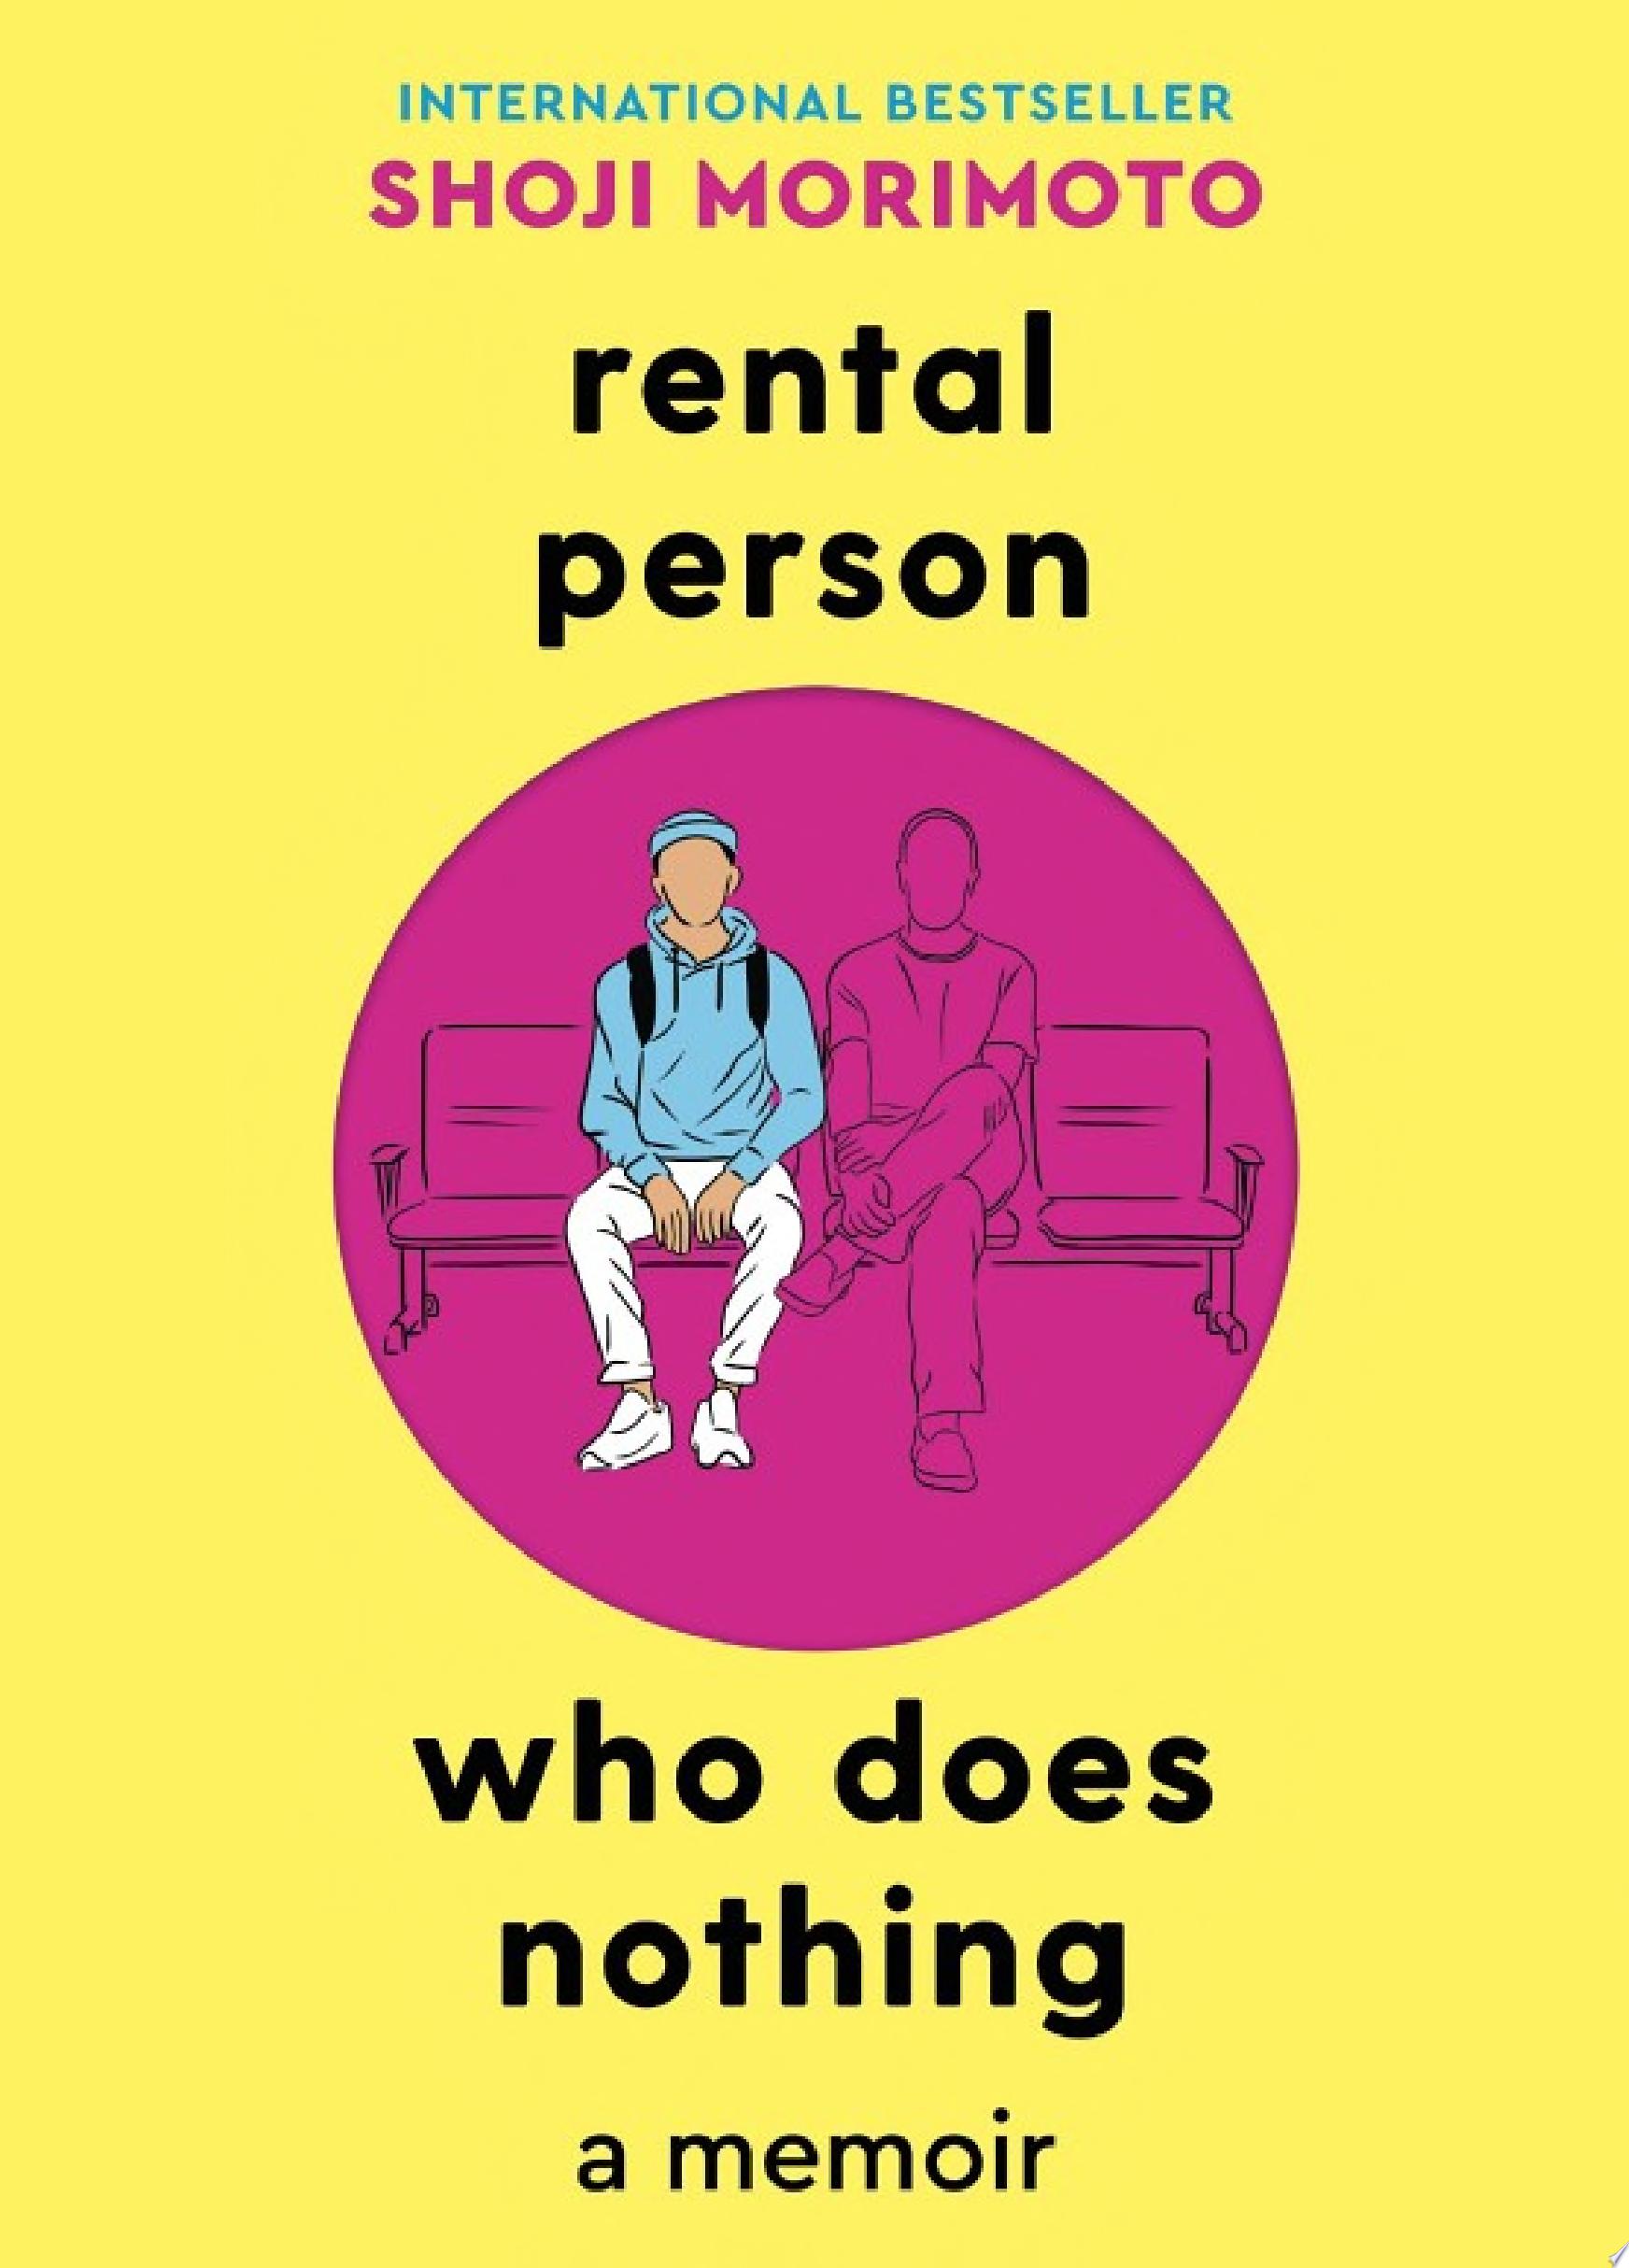 Image for "Rental Person Who Does Nothing"